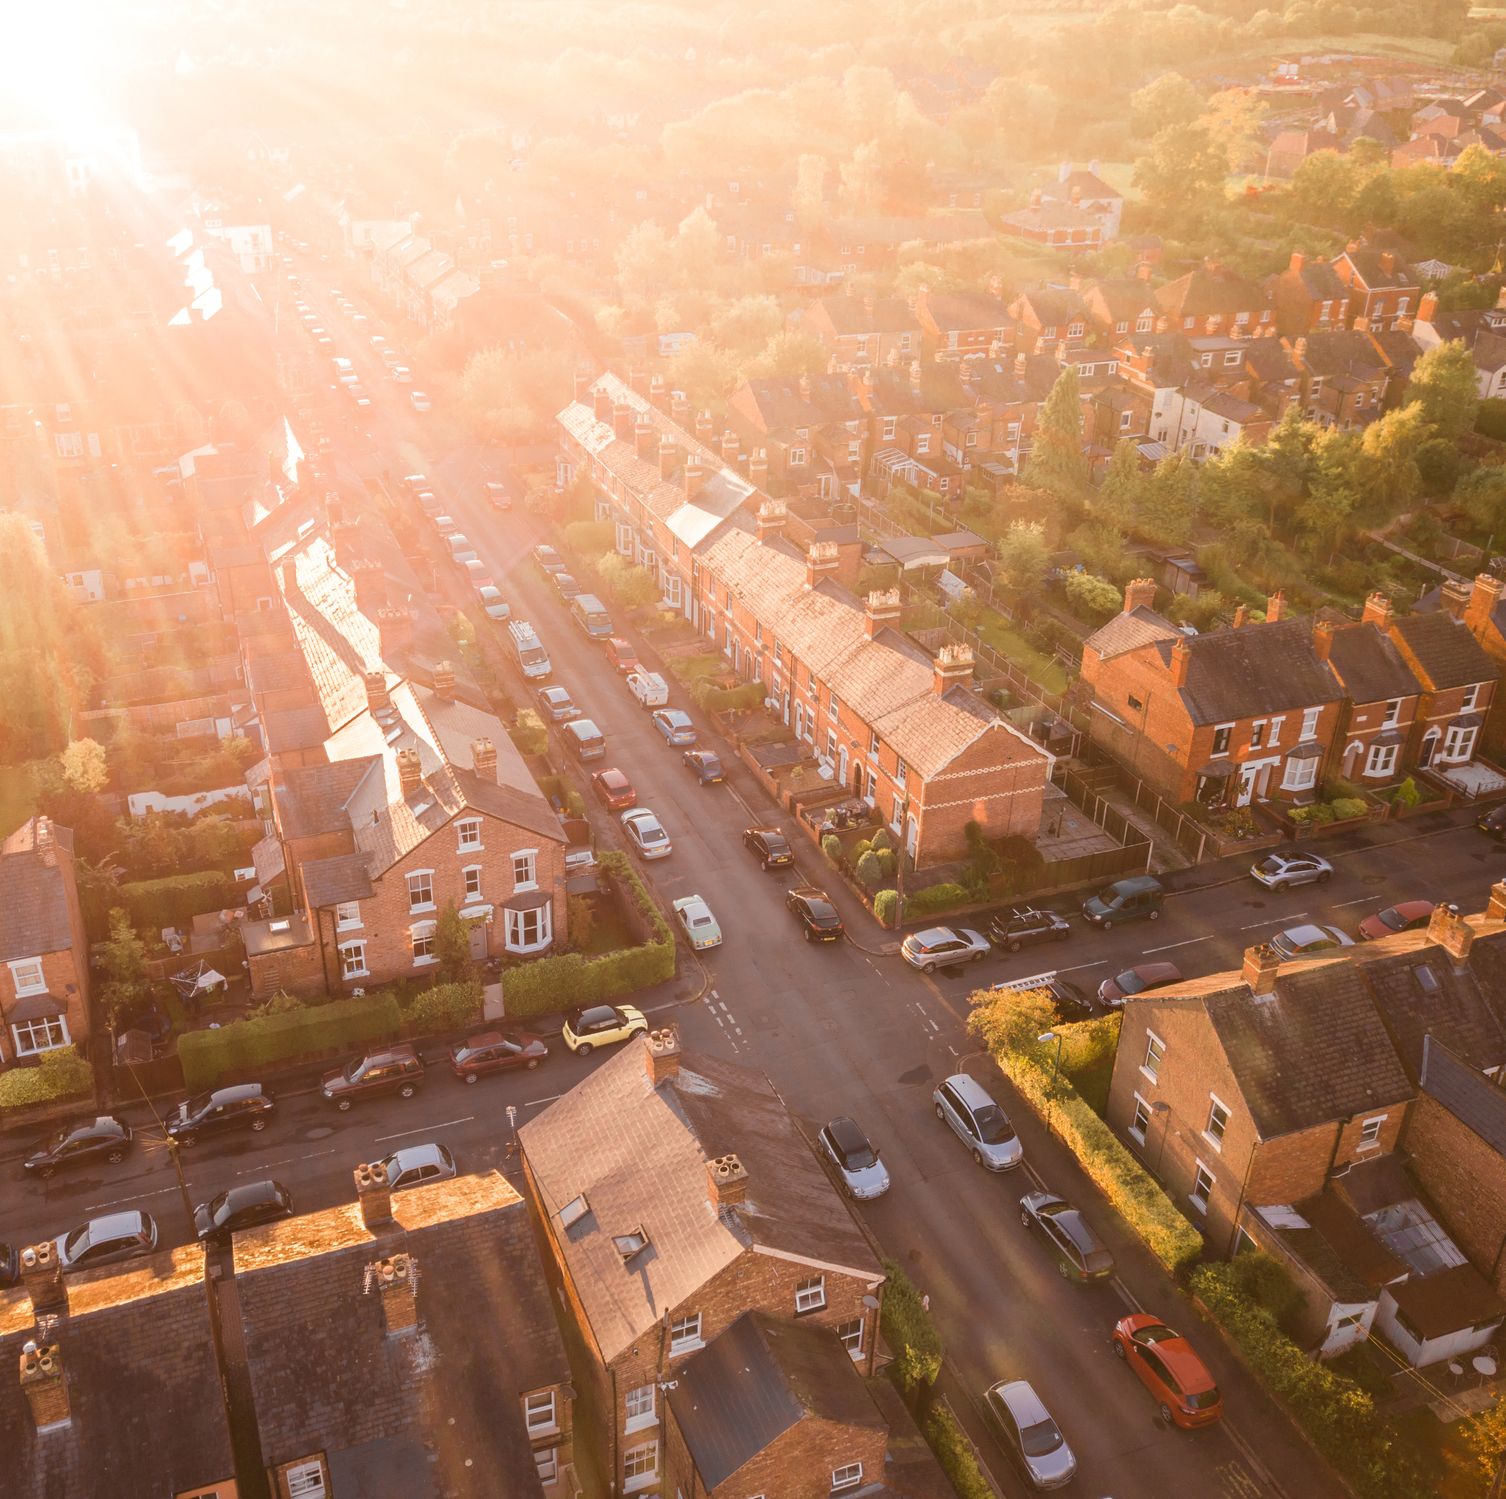 Aerial view of the sun setting over a cross roads in a traditional UK suburb